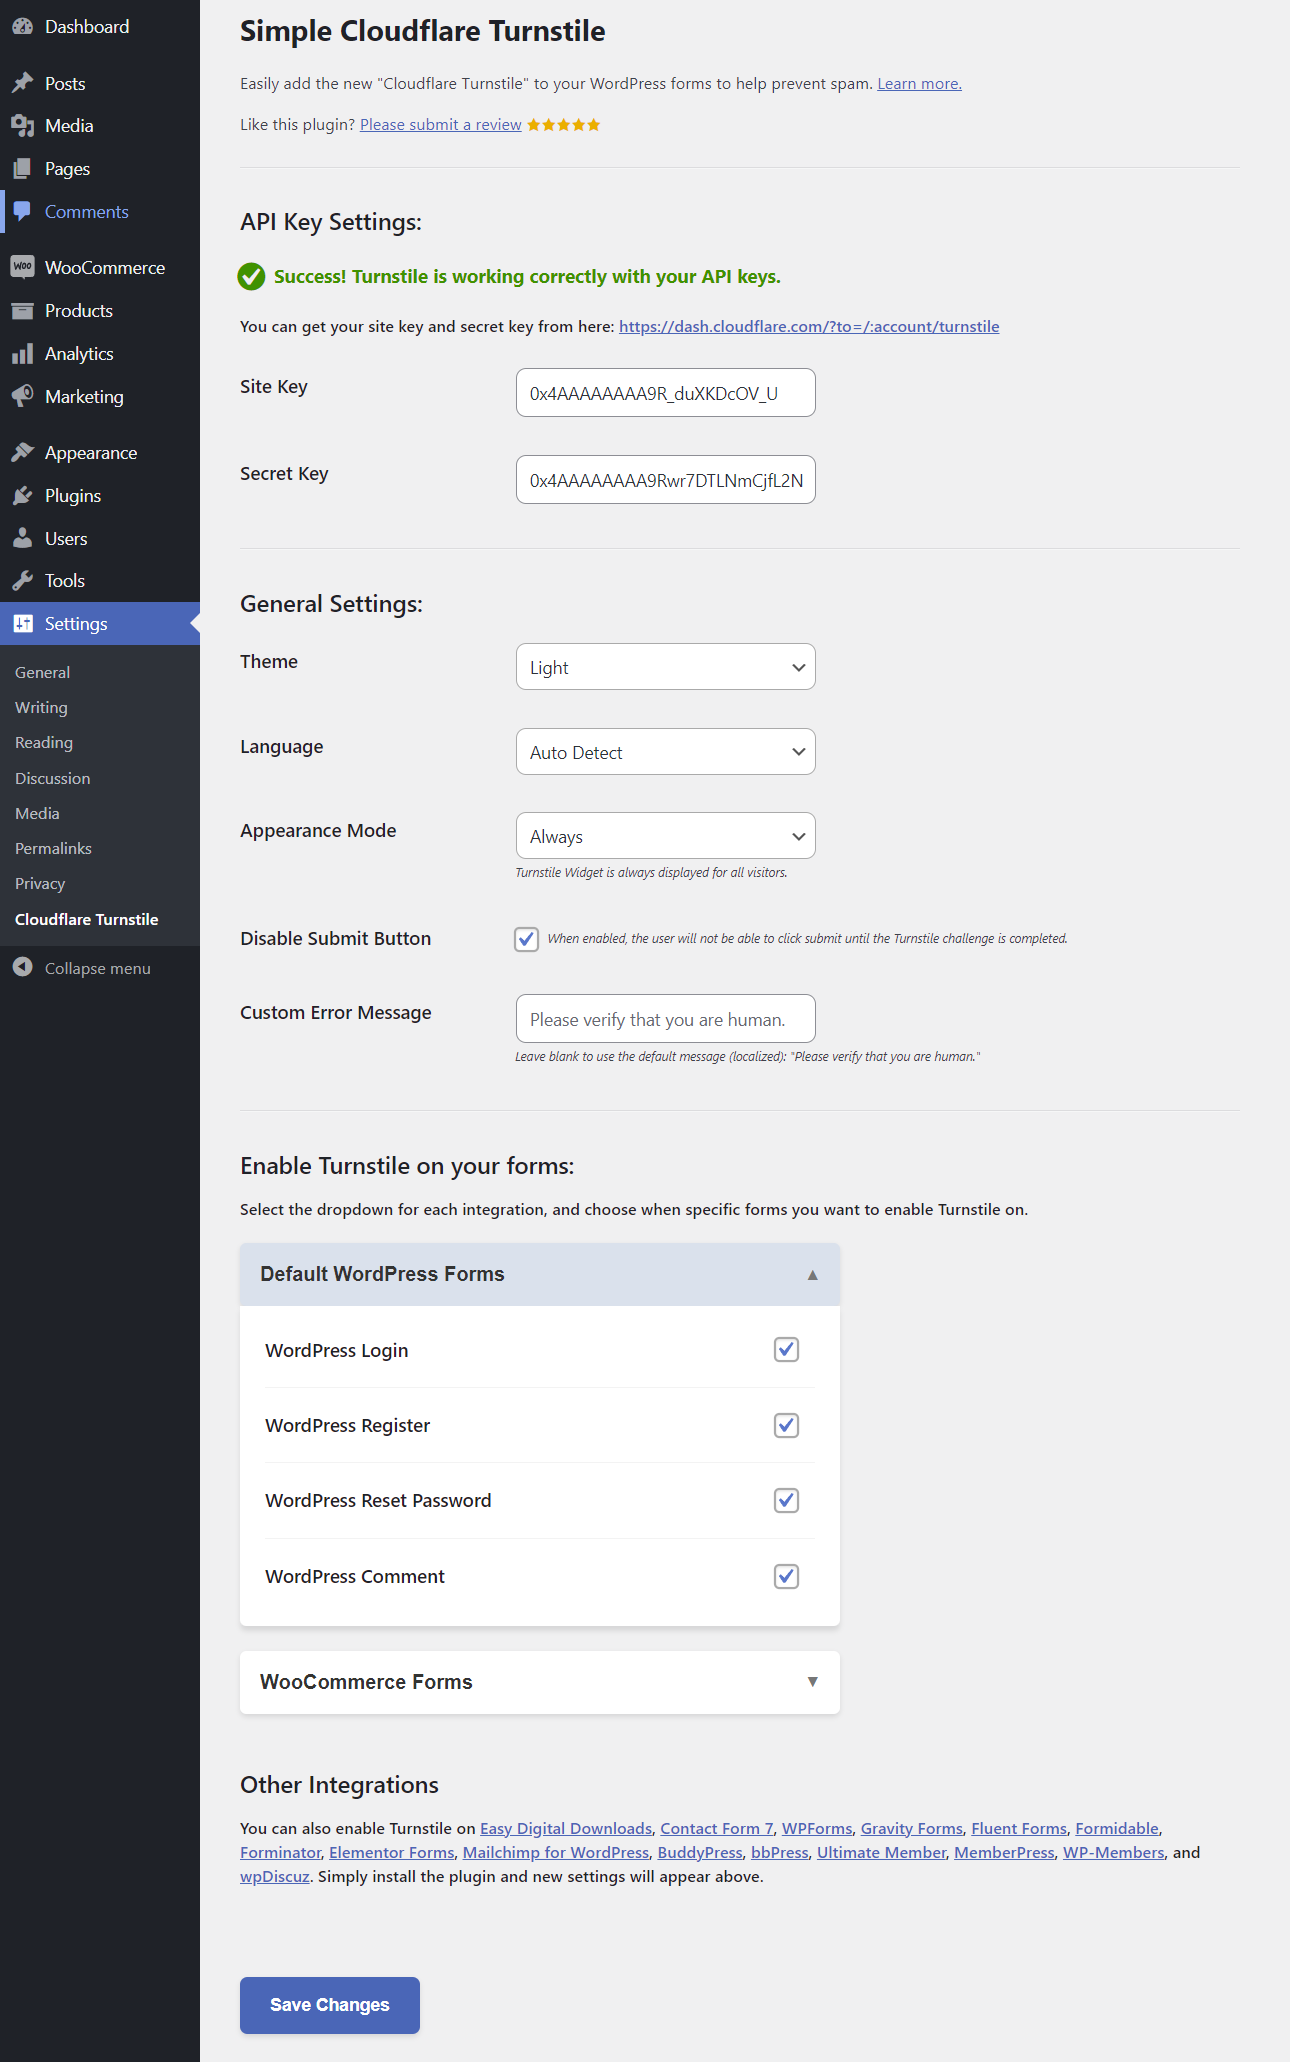 Example Settings Page